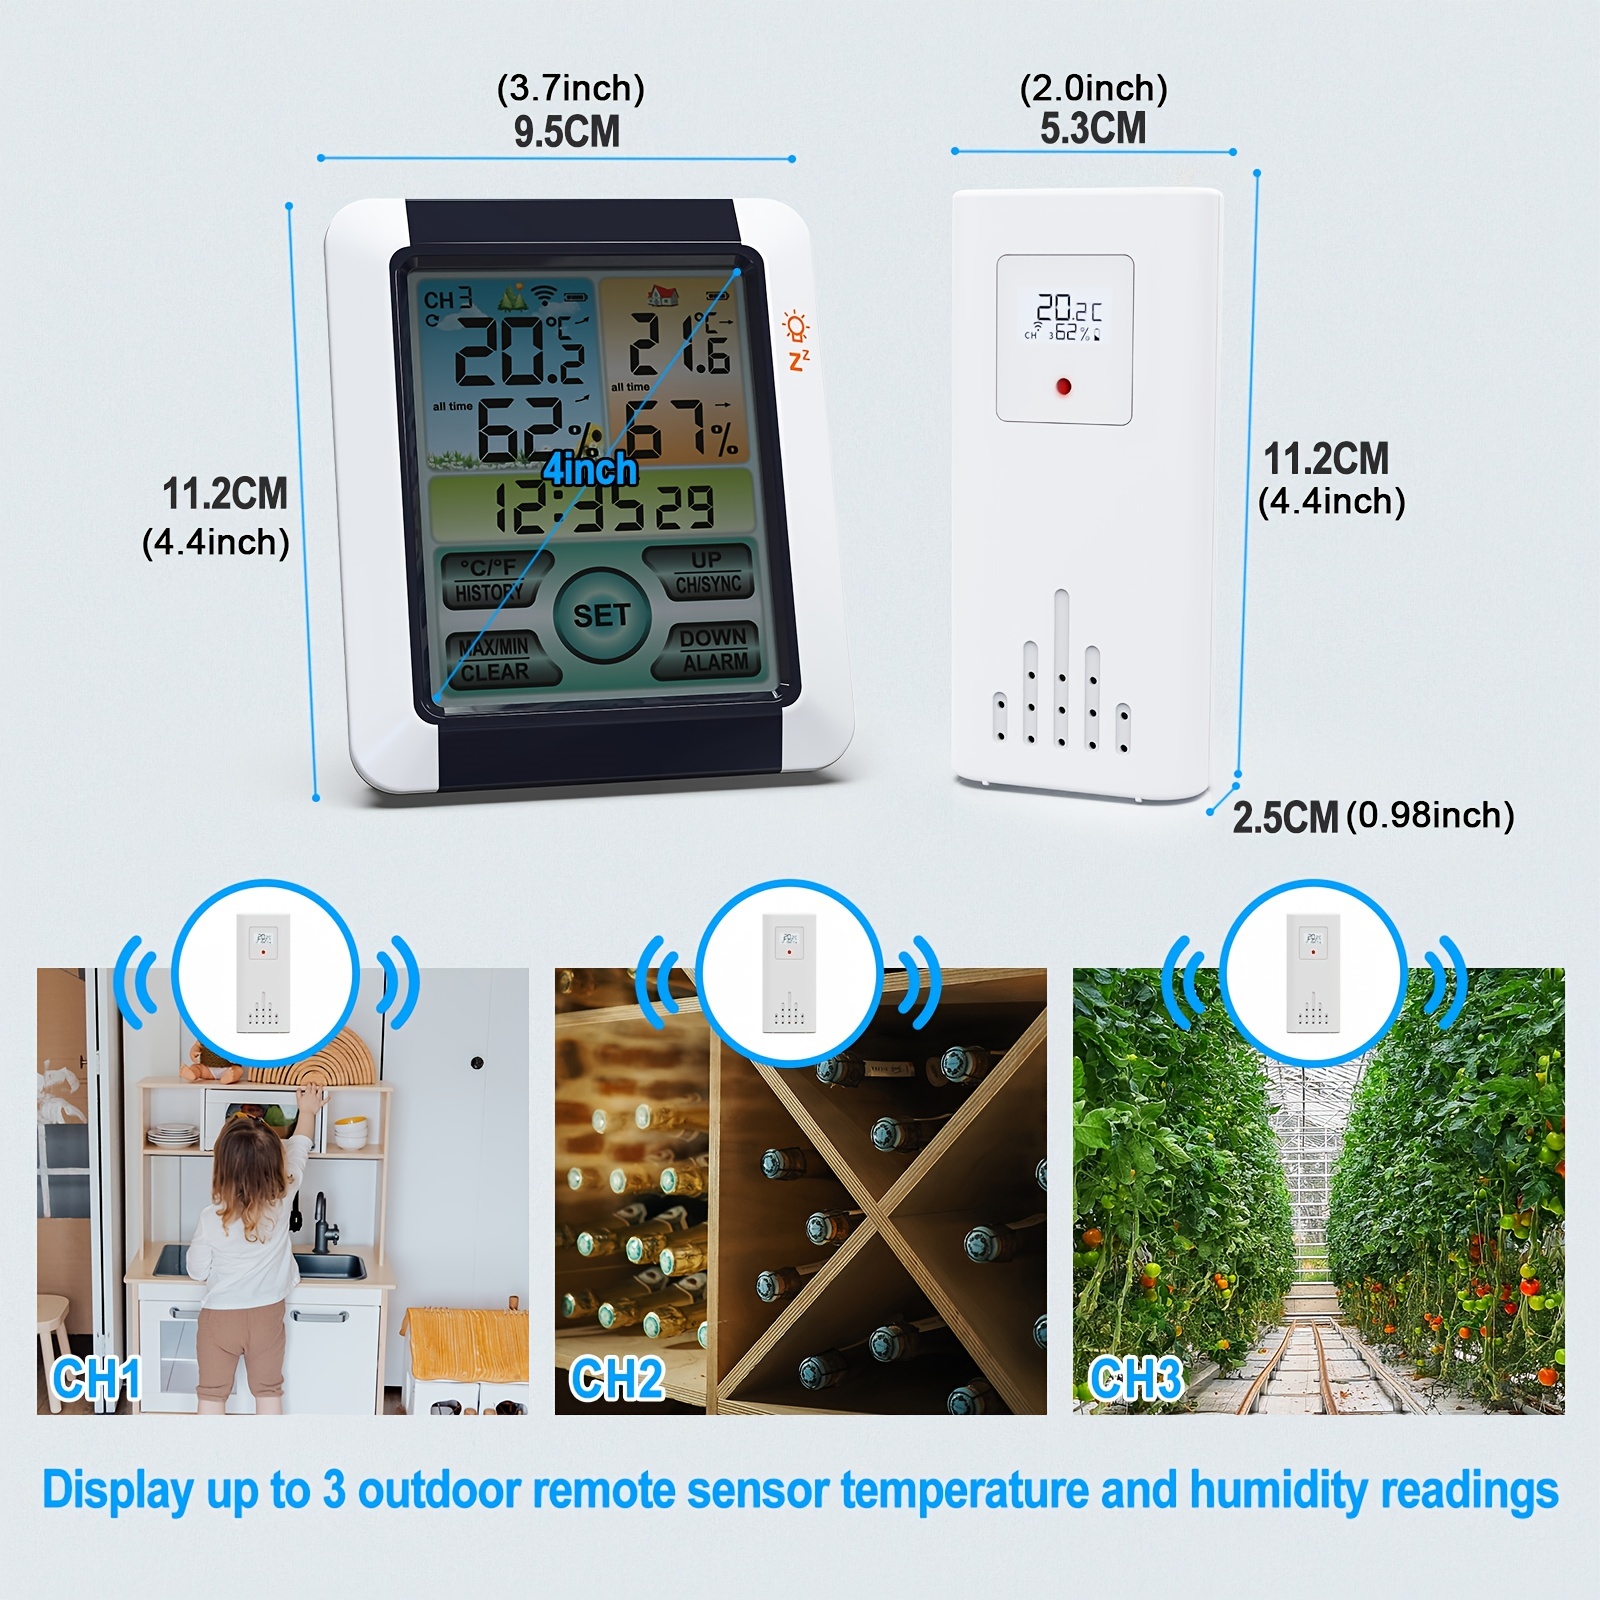 Indoor Outdoor Thermometer Wireless Digital Hygrometer Temperature and Humidity Monitor with Touchscreen LCD Backlight, 200ft/60m Range, Battery Inclu